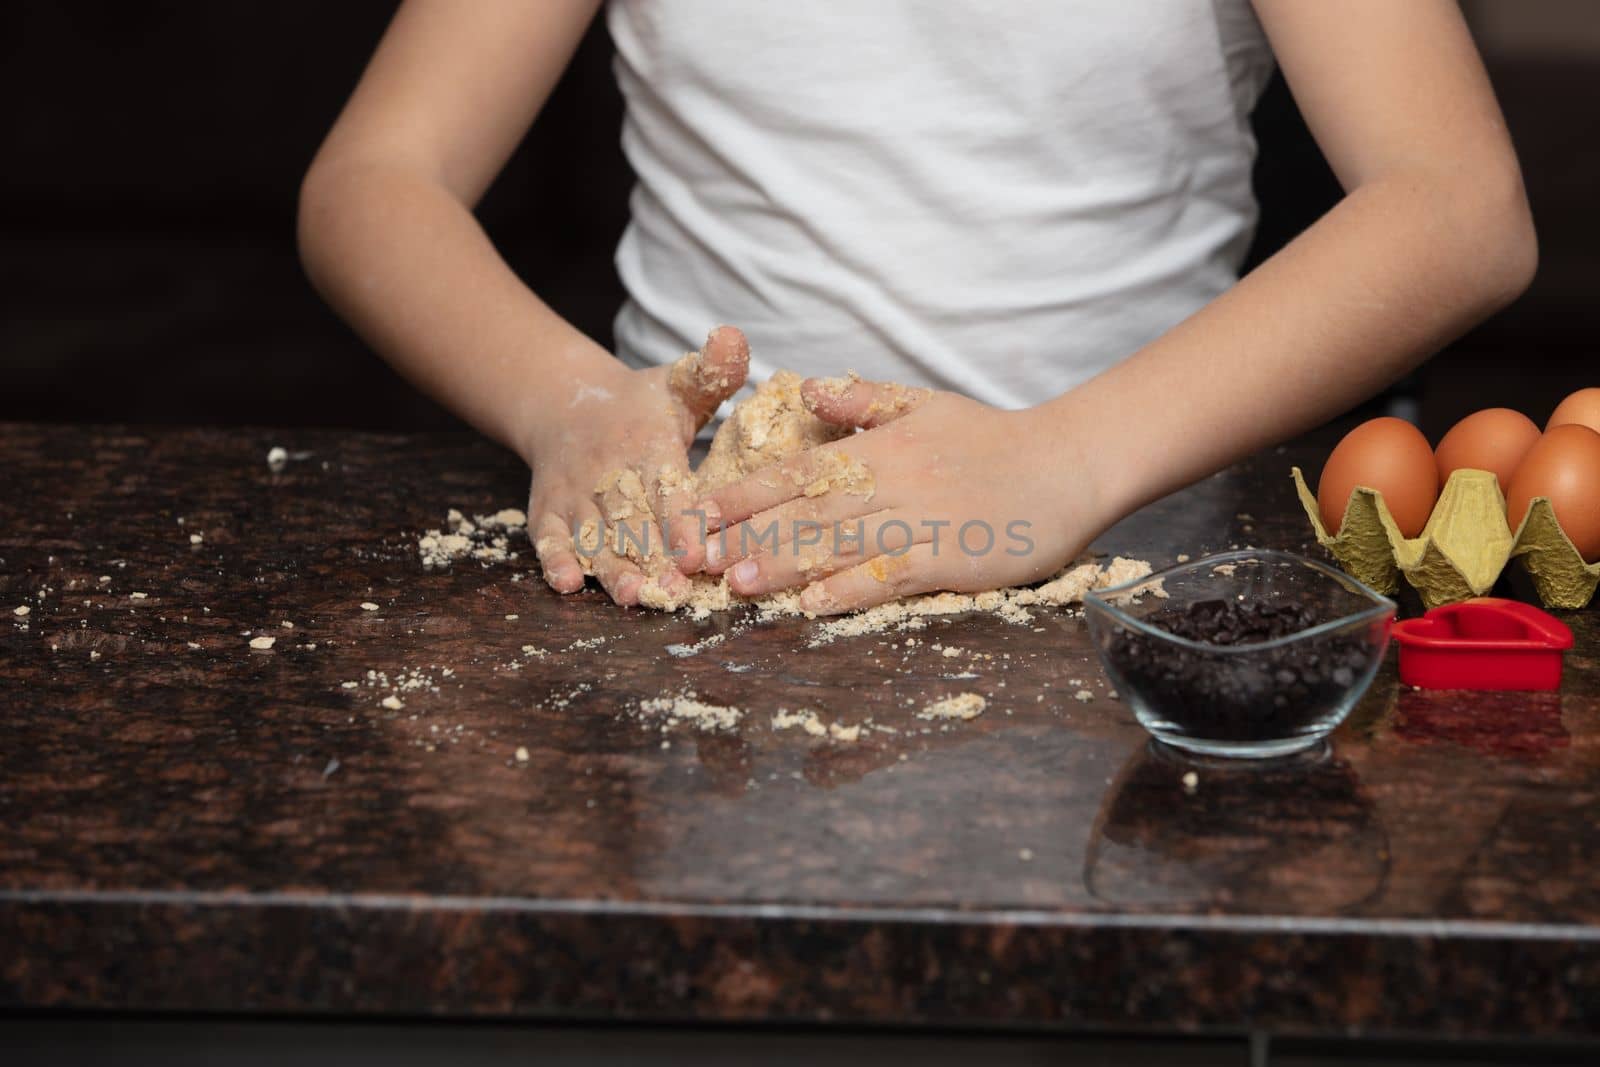 Kids baking cookies in house kitchen . Close-up child`s hands preparing cookies using cookie.